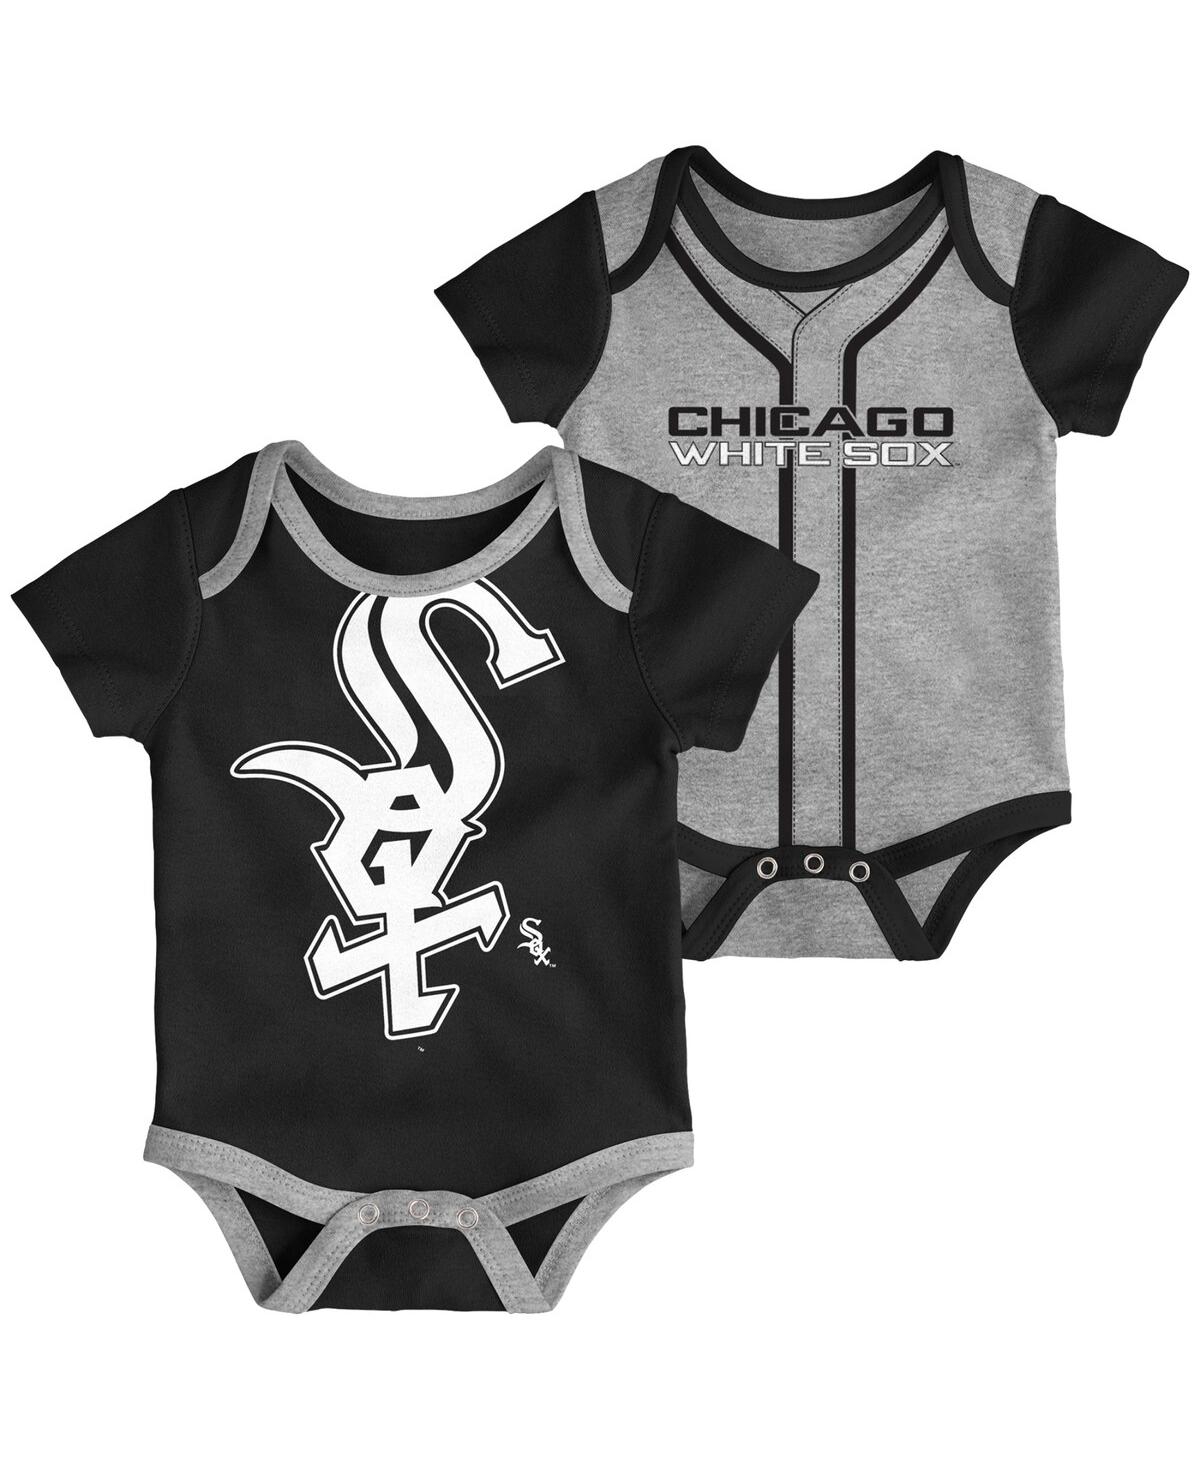 Outerstuff Babies' Infant Boys And Girls Black, Heathered Gray Chicago White Sox Double 2-pack Bodysuit Set In Black,heathered Gray